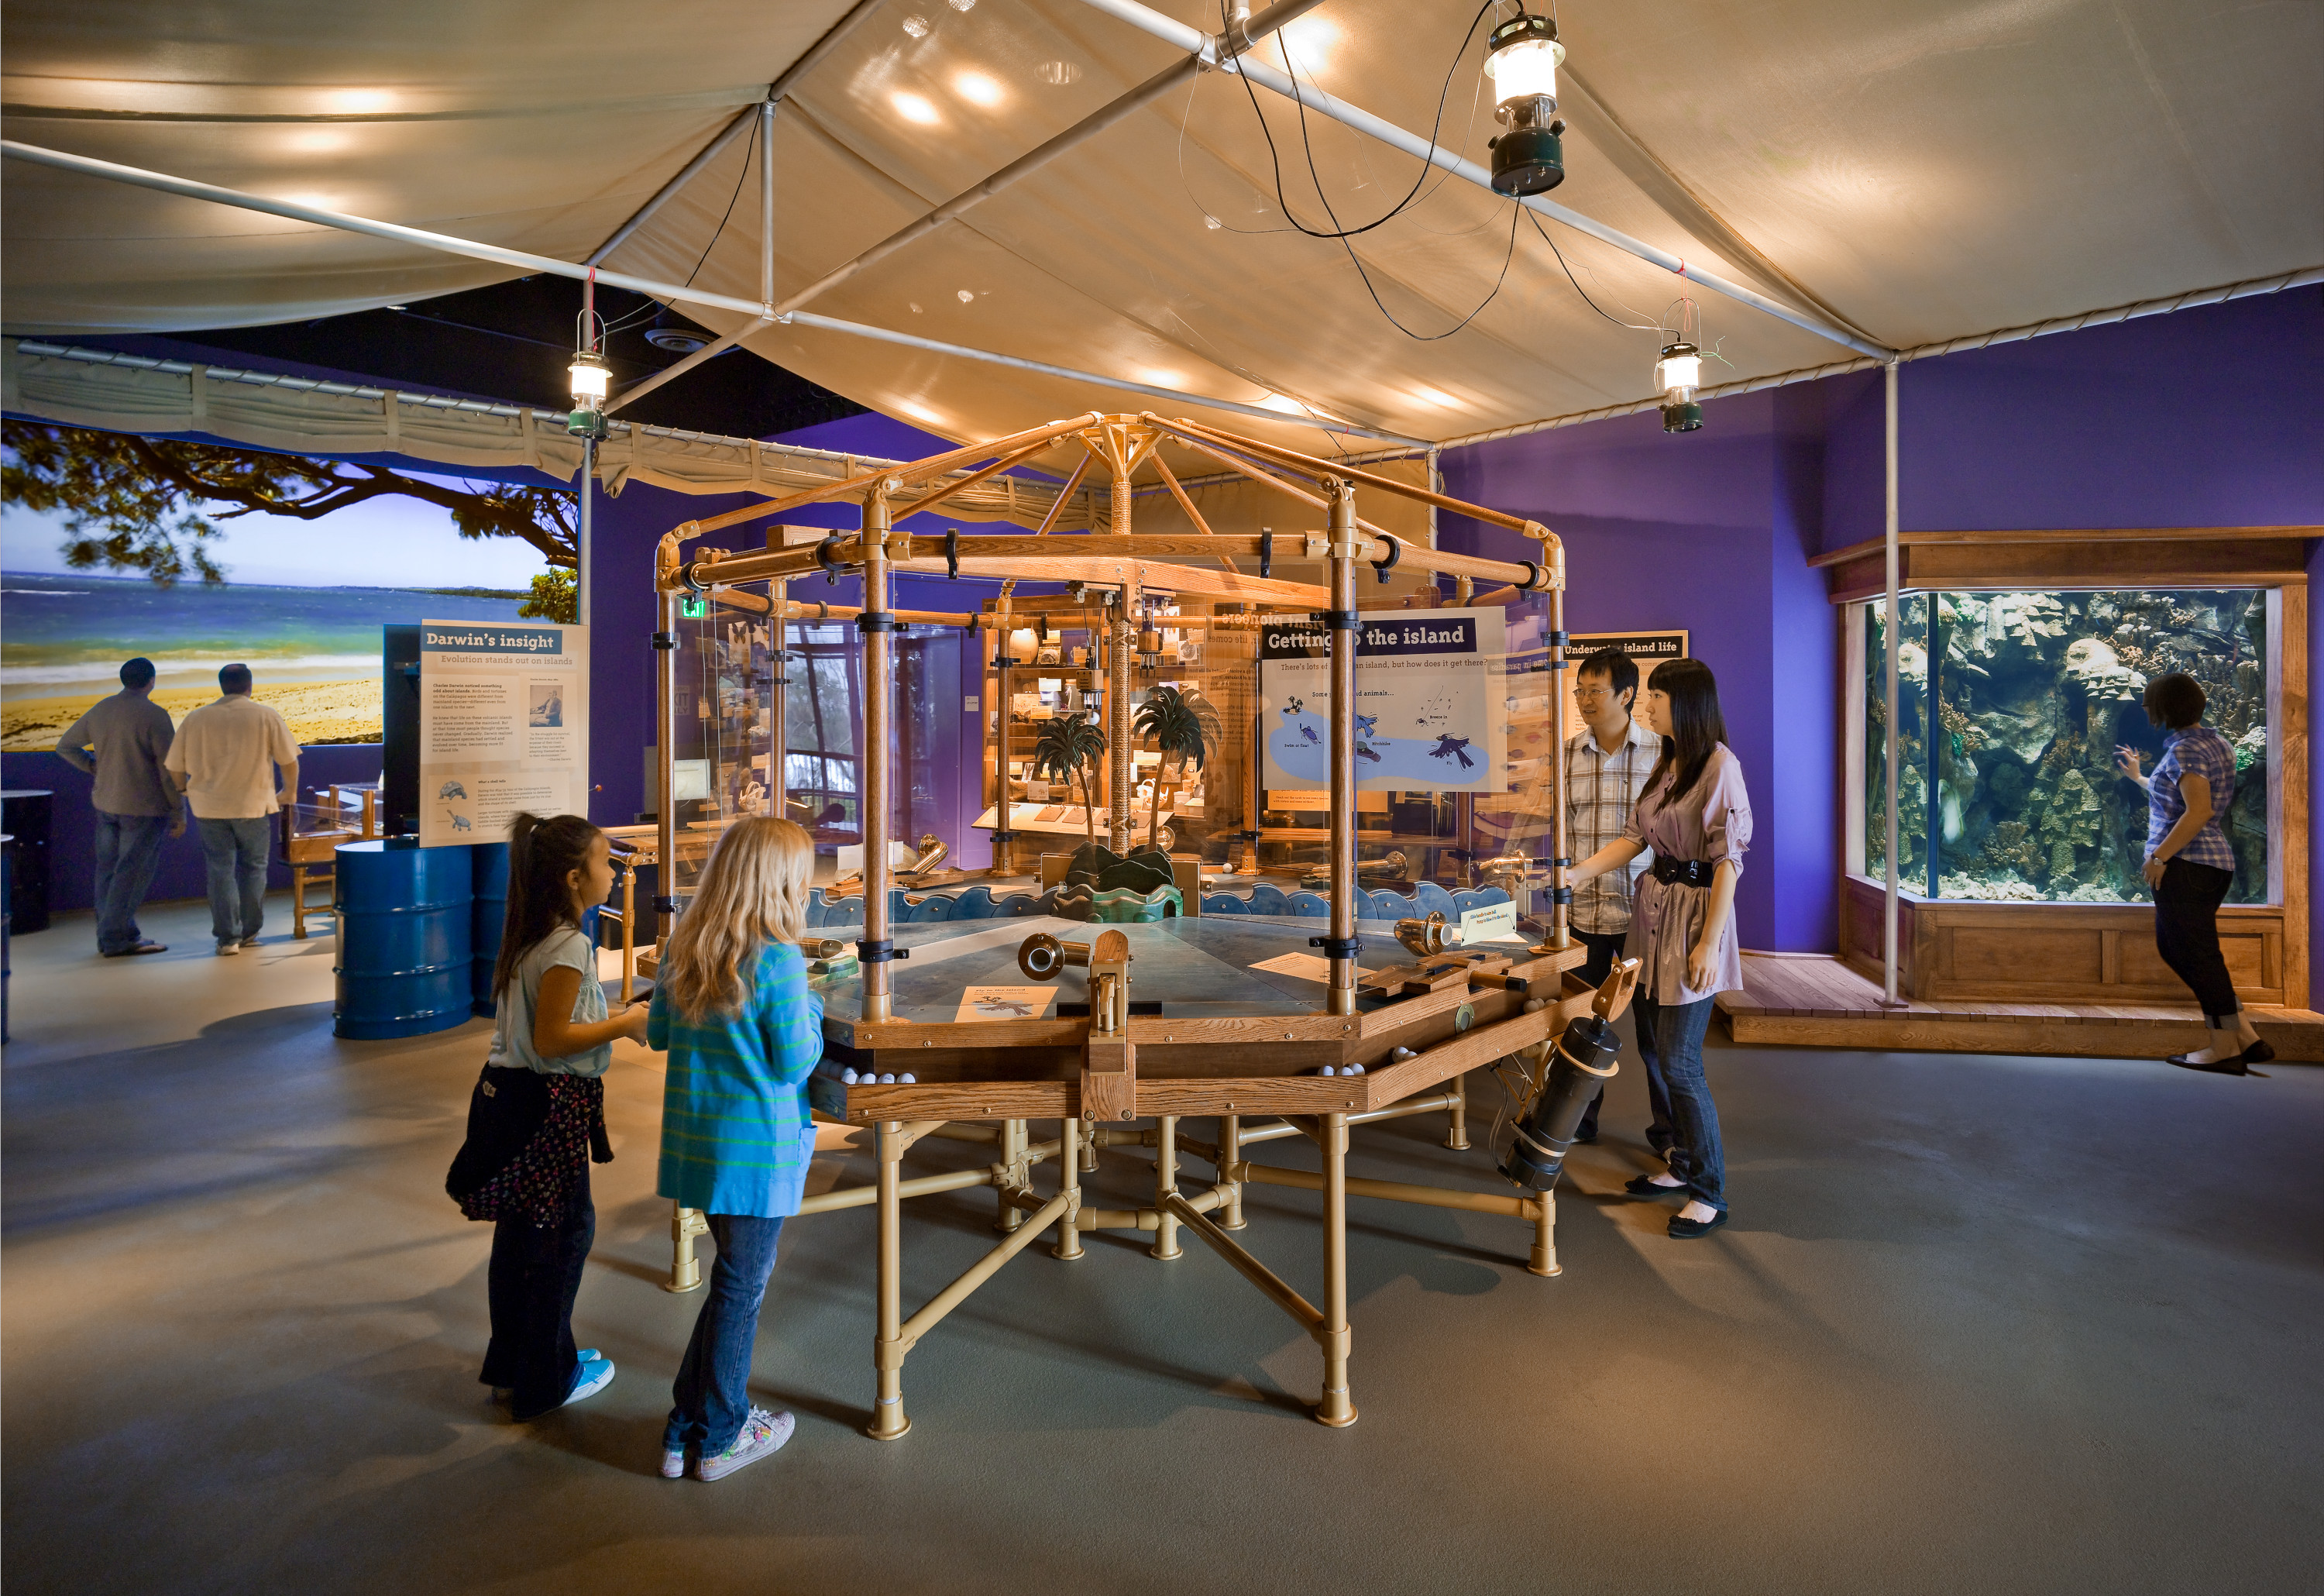 Families interact with exhibits in Ecosystems' Island Zone, featuring a tropical fish tank and island imagery